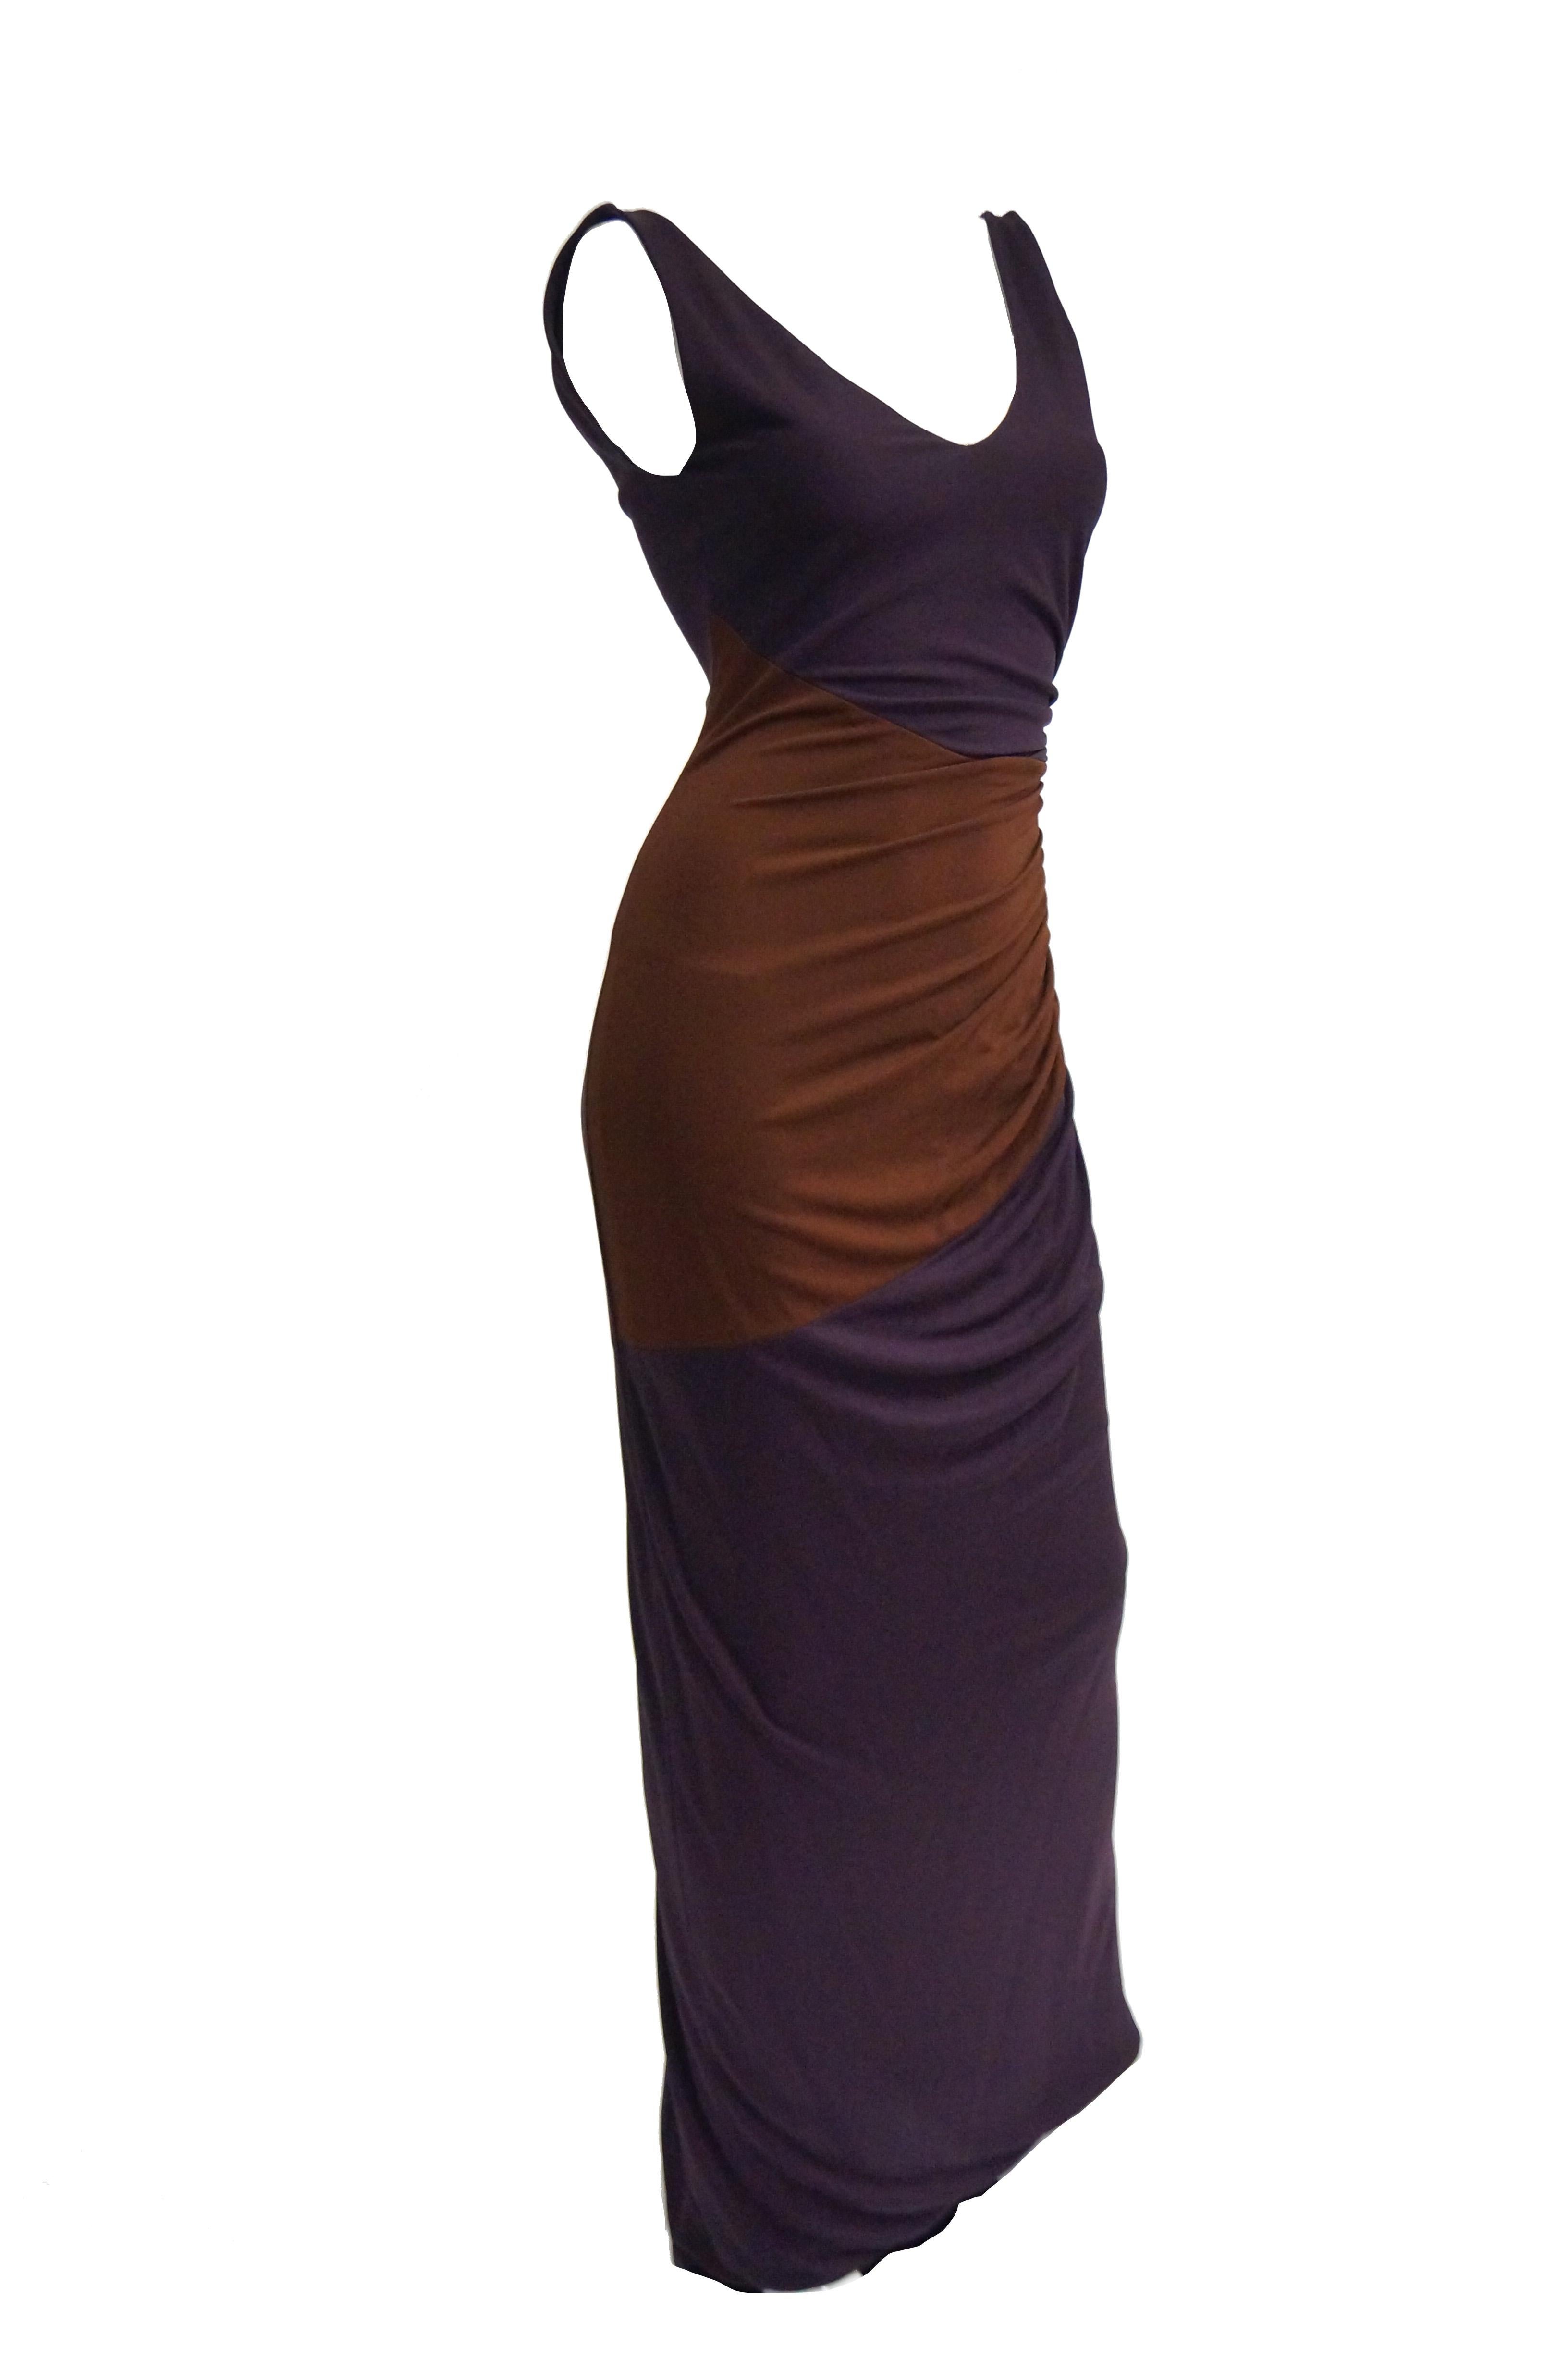 2007 Donald Deal Aubergine and Ginger Colorblock Drape Bodycon Evening Dress For Sale 1